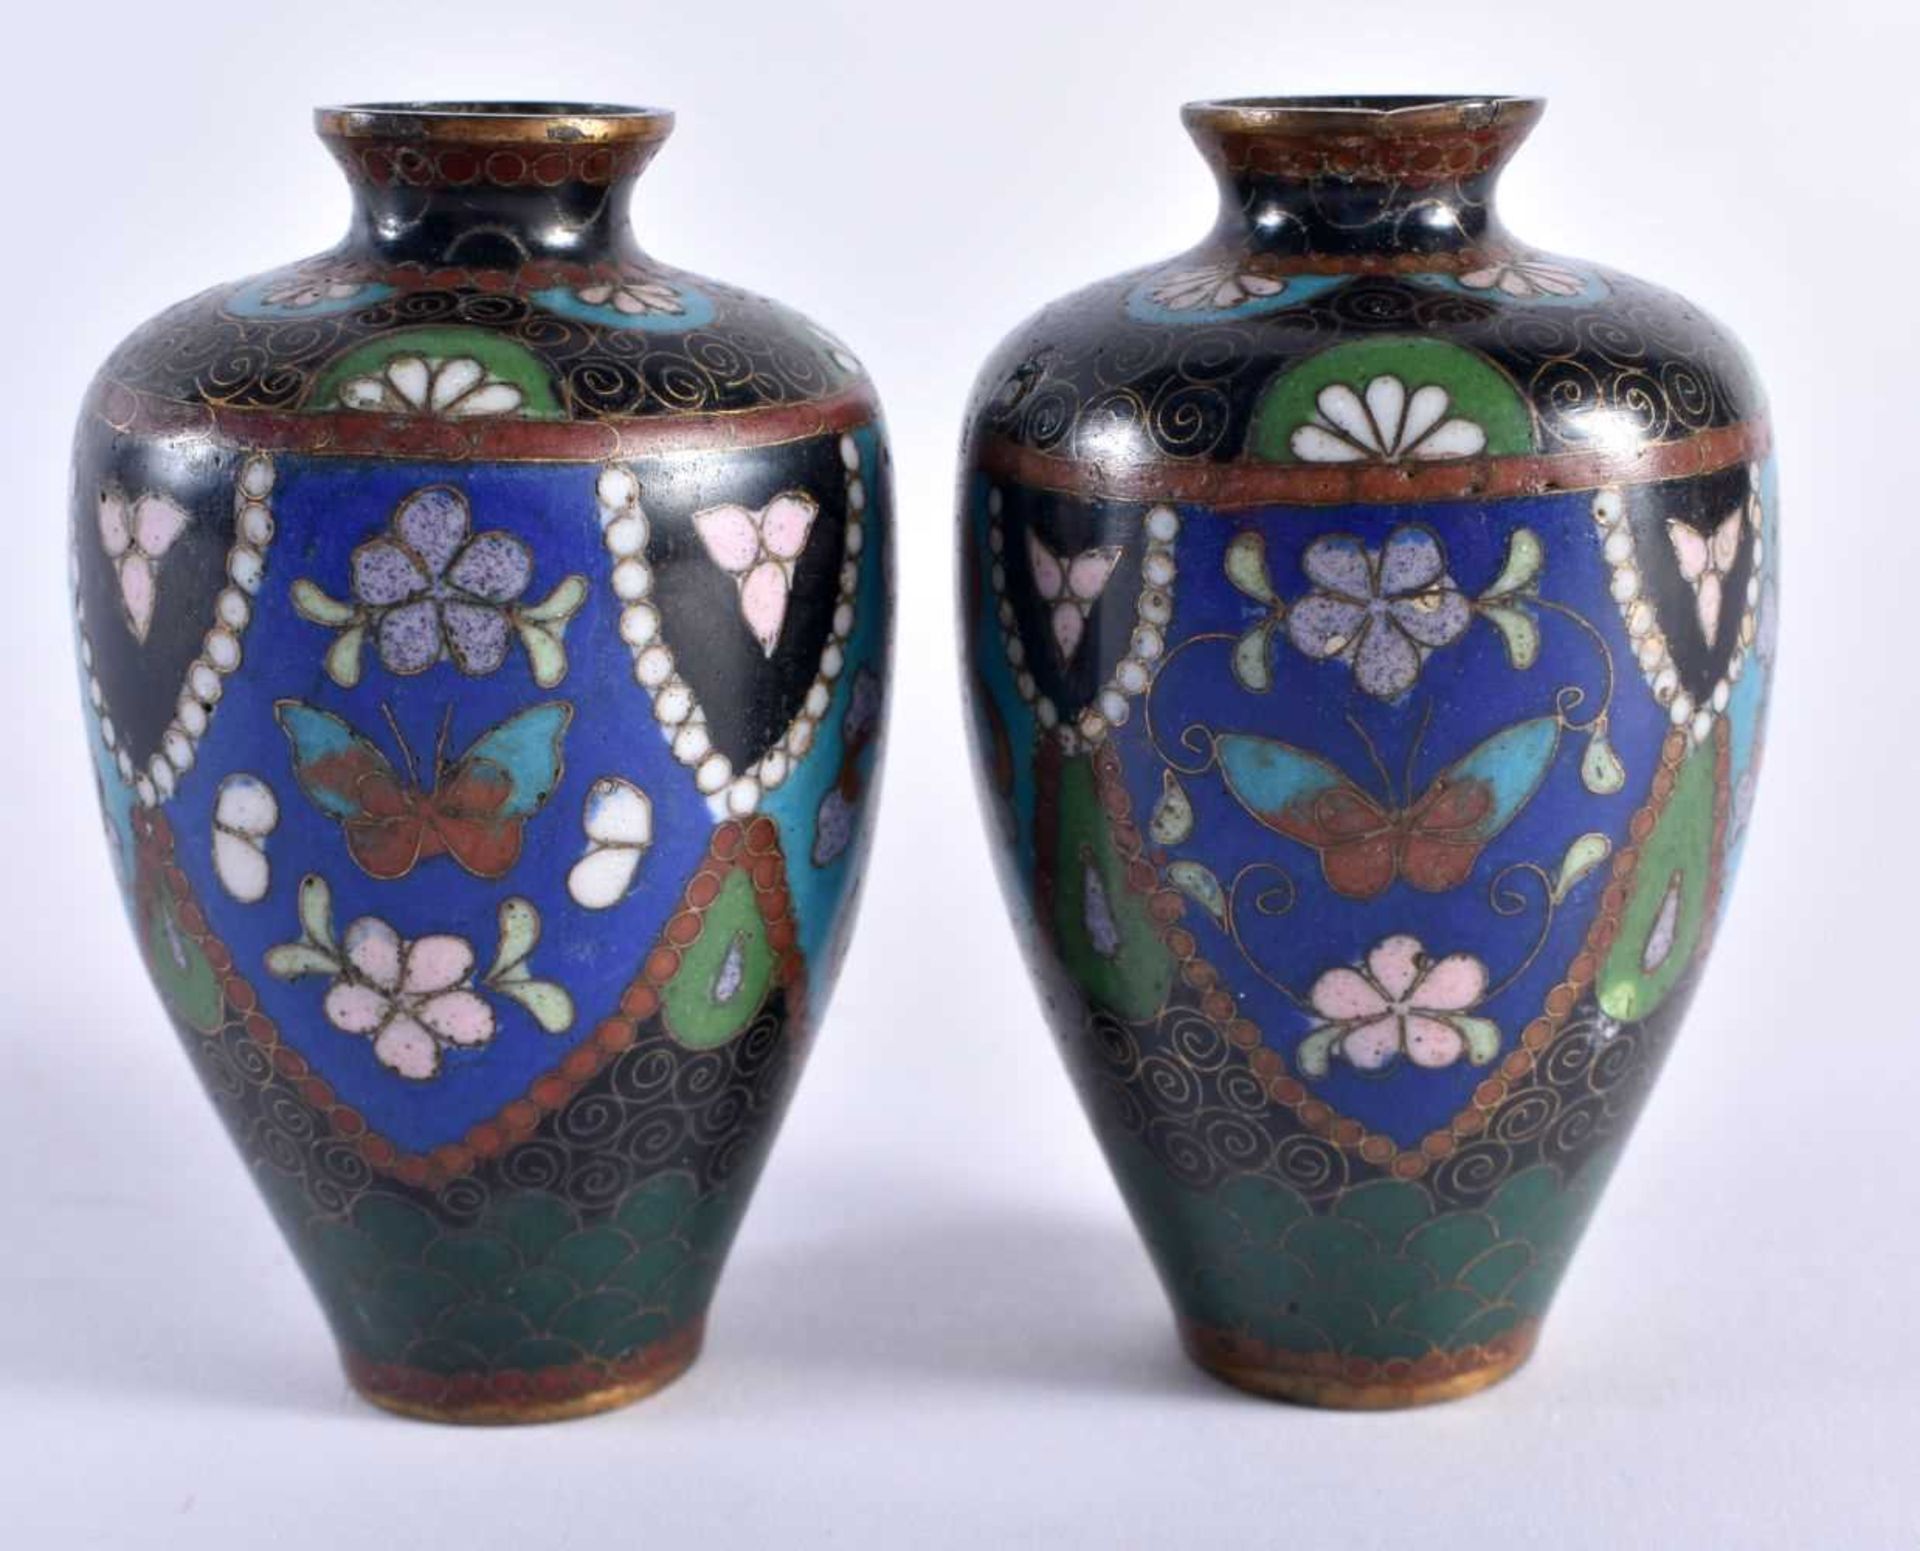 A MINIATURE PAIR OF LATE 19TH CENTURY JAPANESE MEIJI PERIOD CLOISONNE ENAMEL VASES decorated with